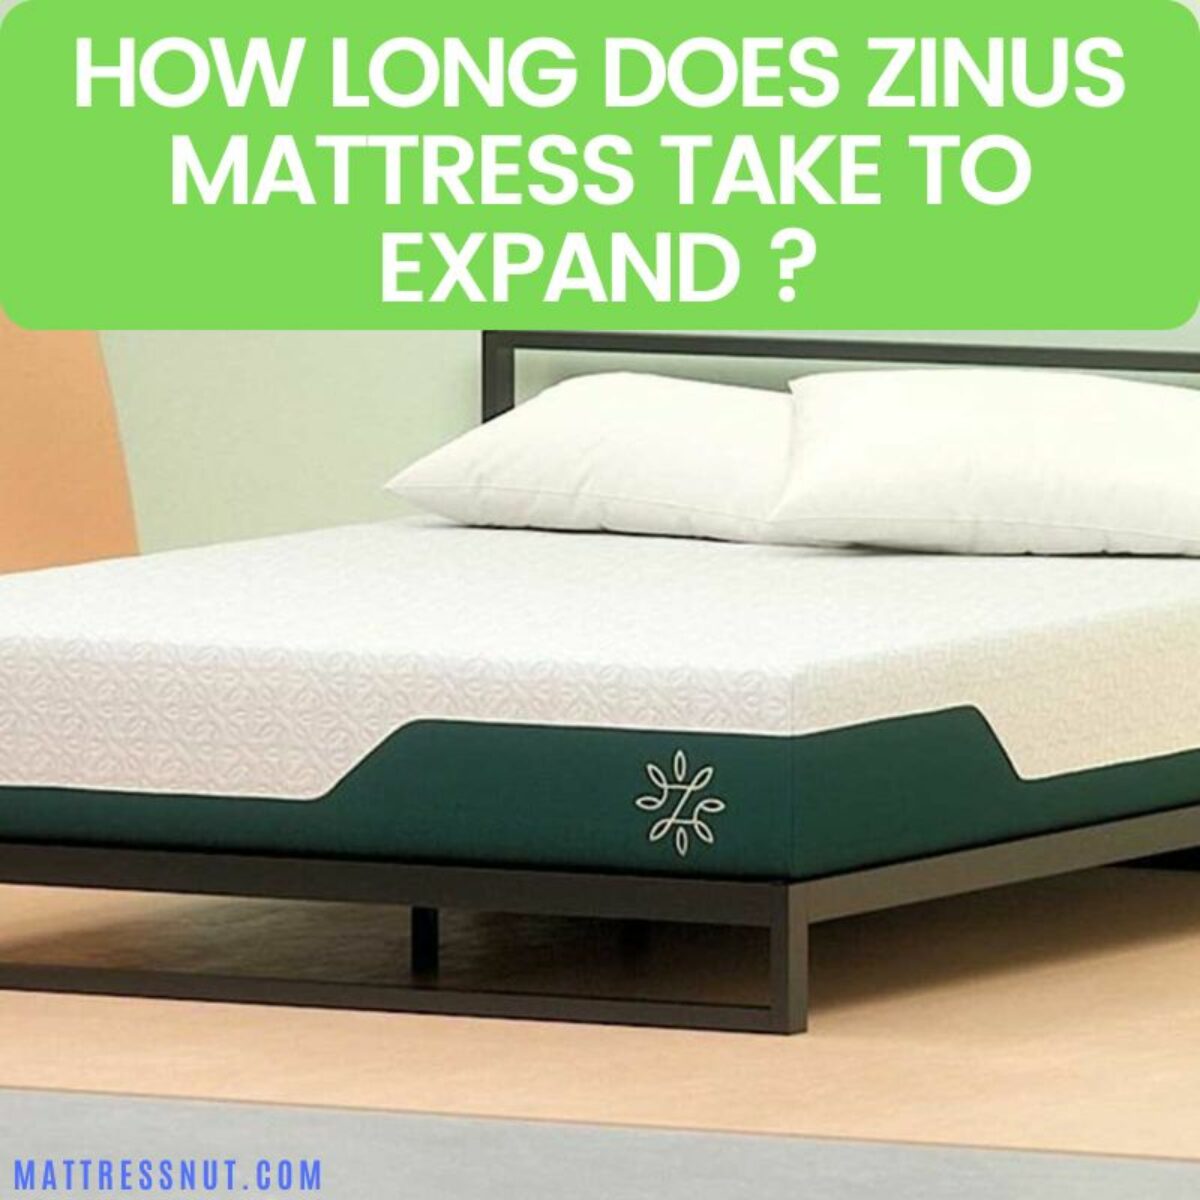 How Long Does It Take For A Puffy Mattress To Expand?